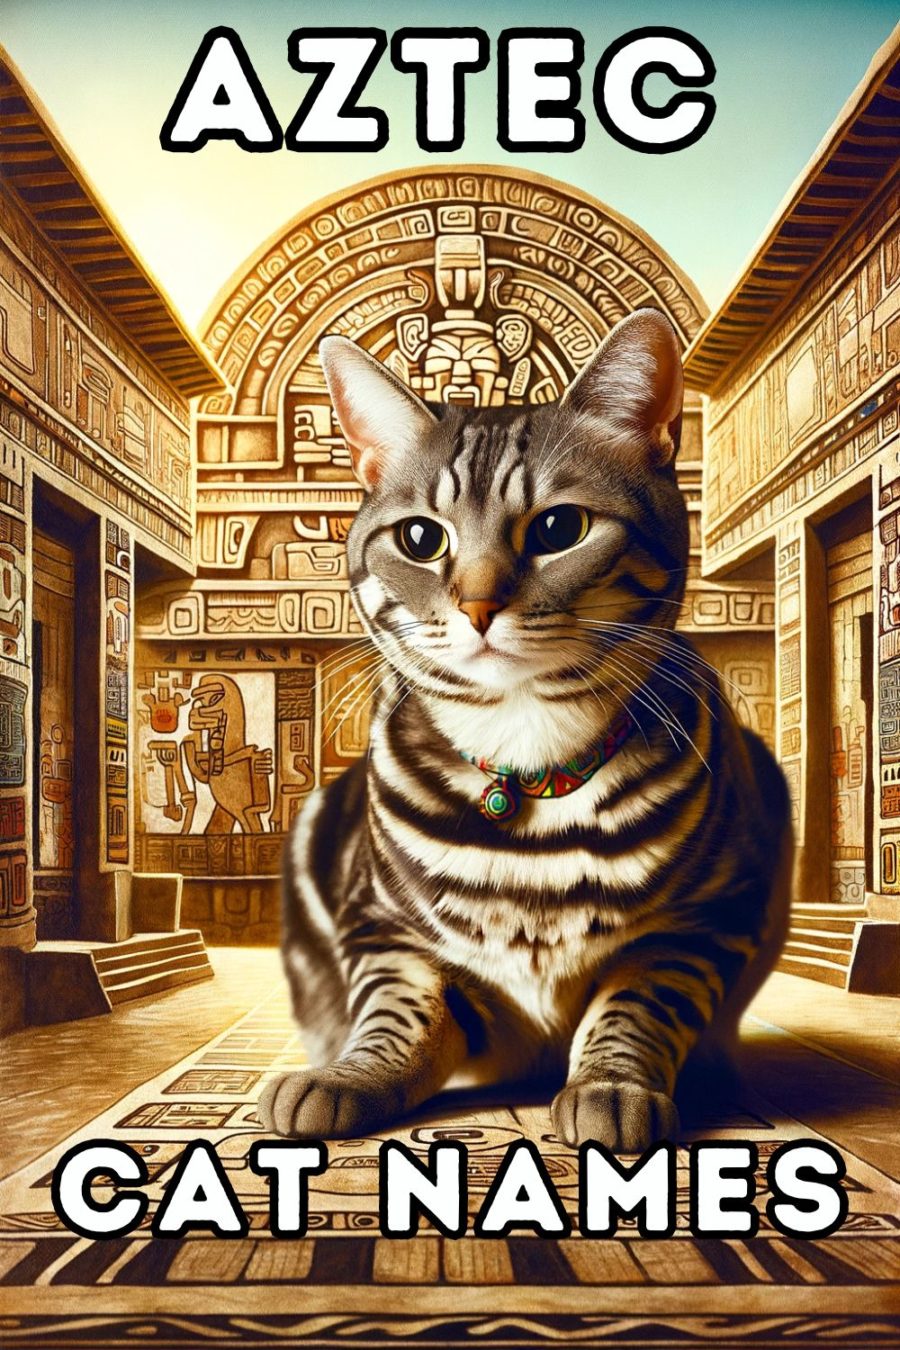 Aztec background with cat in foreground; words Aztec Cat Names at top and bottom of image